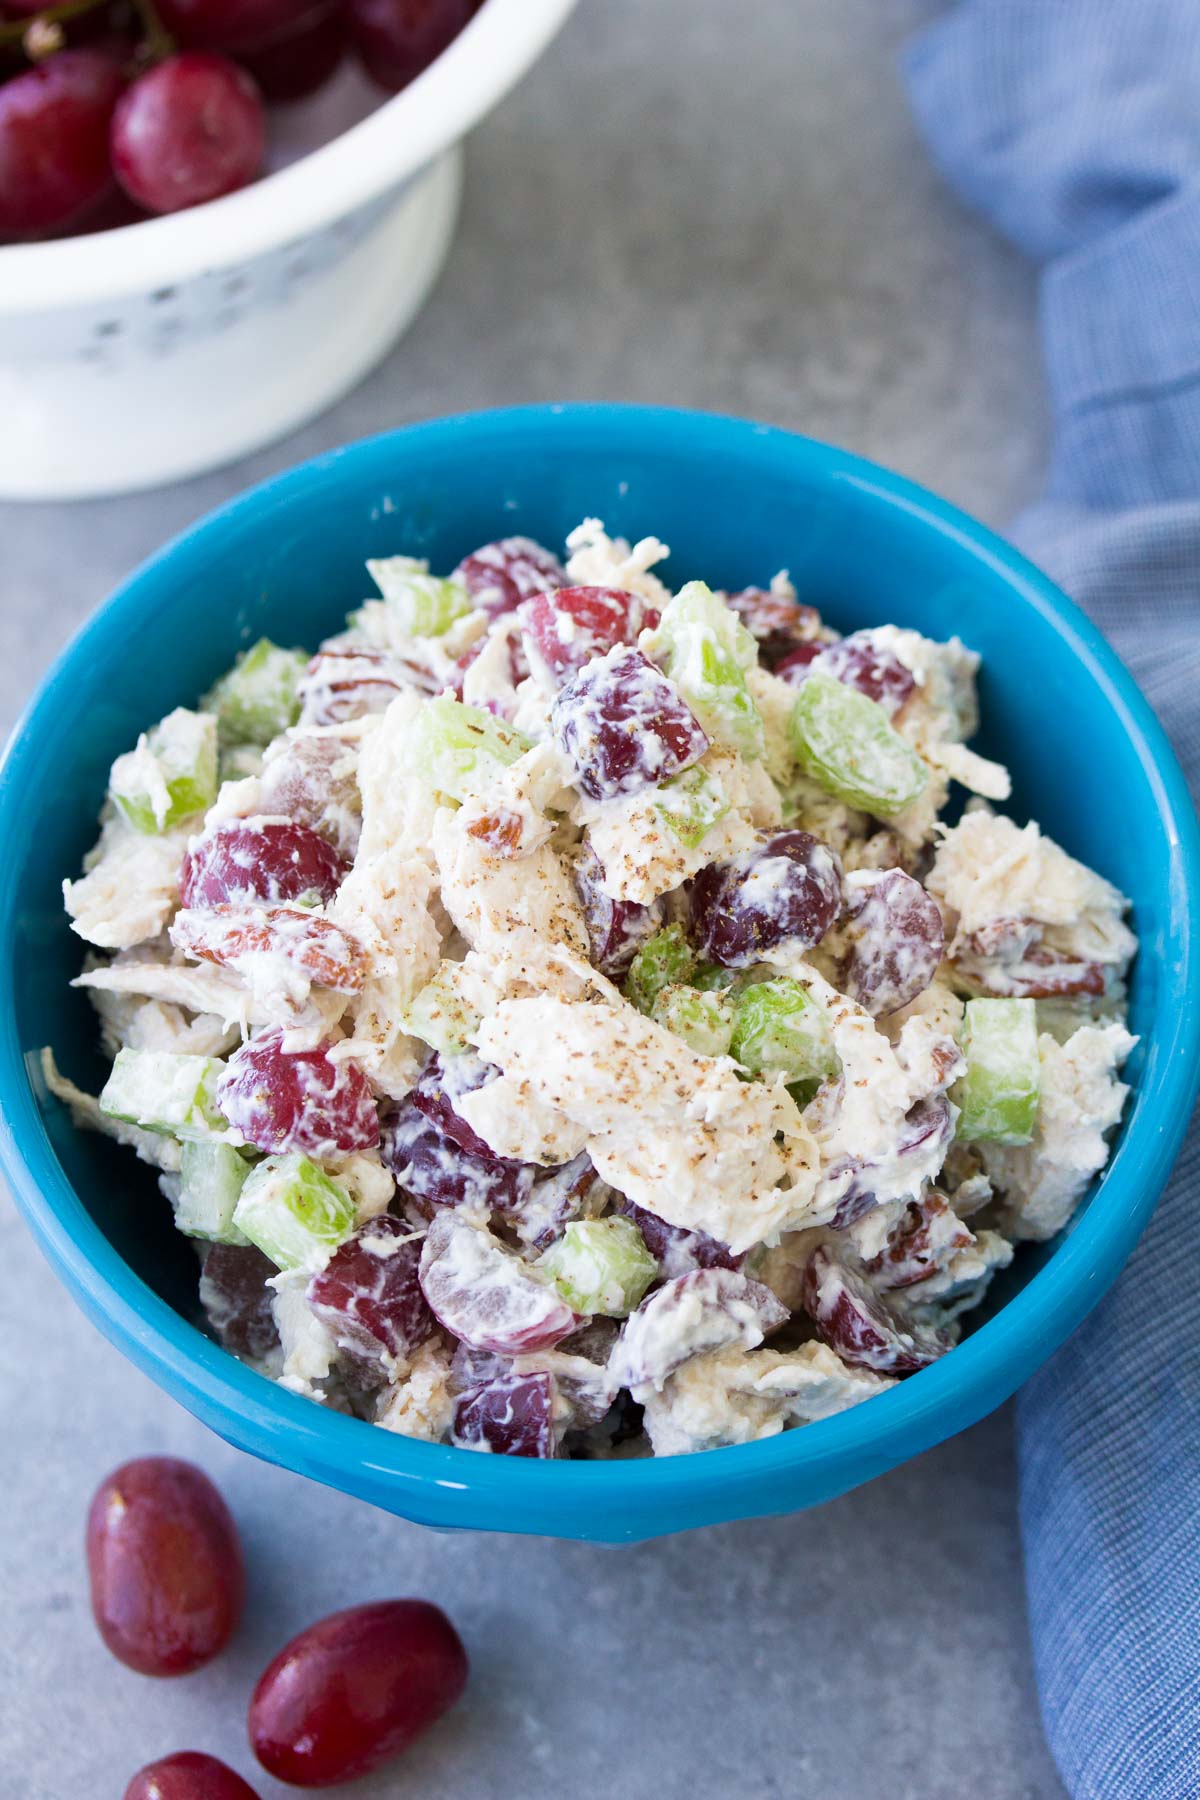 Chicken salad with grapes in a blue bowl with grapes in the background.